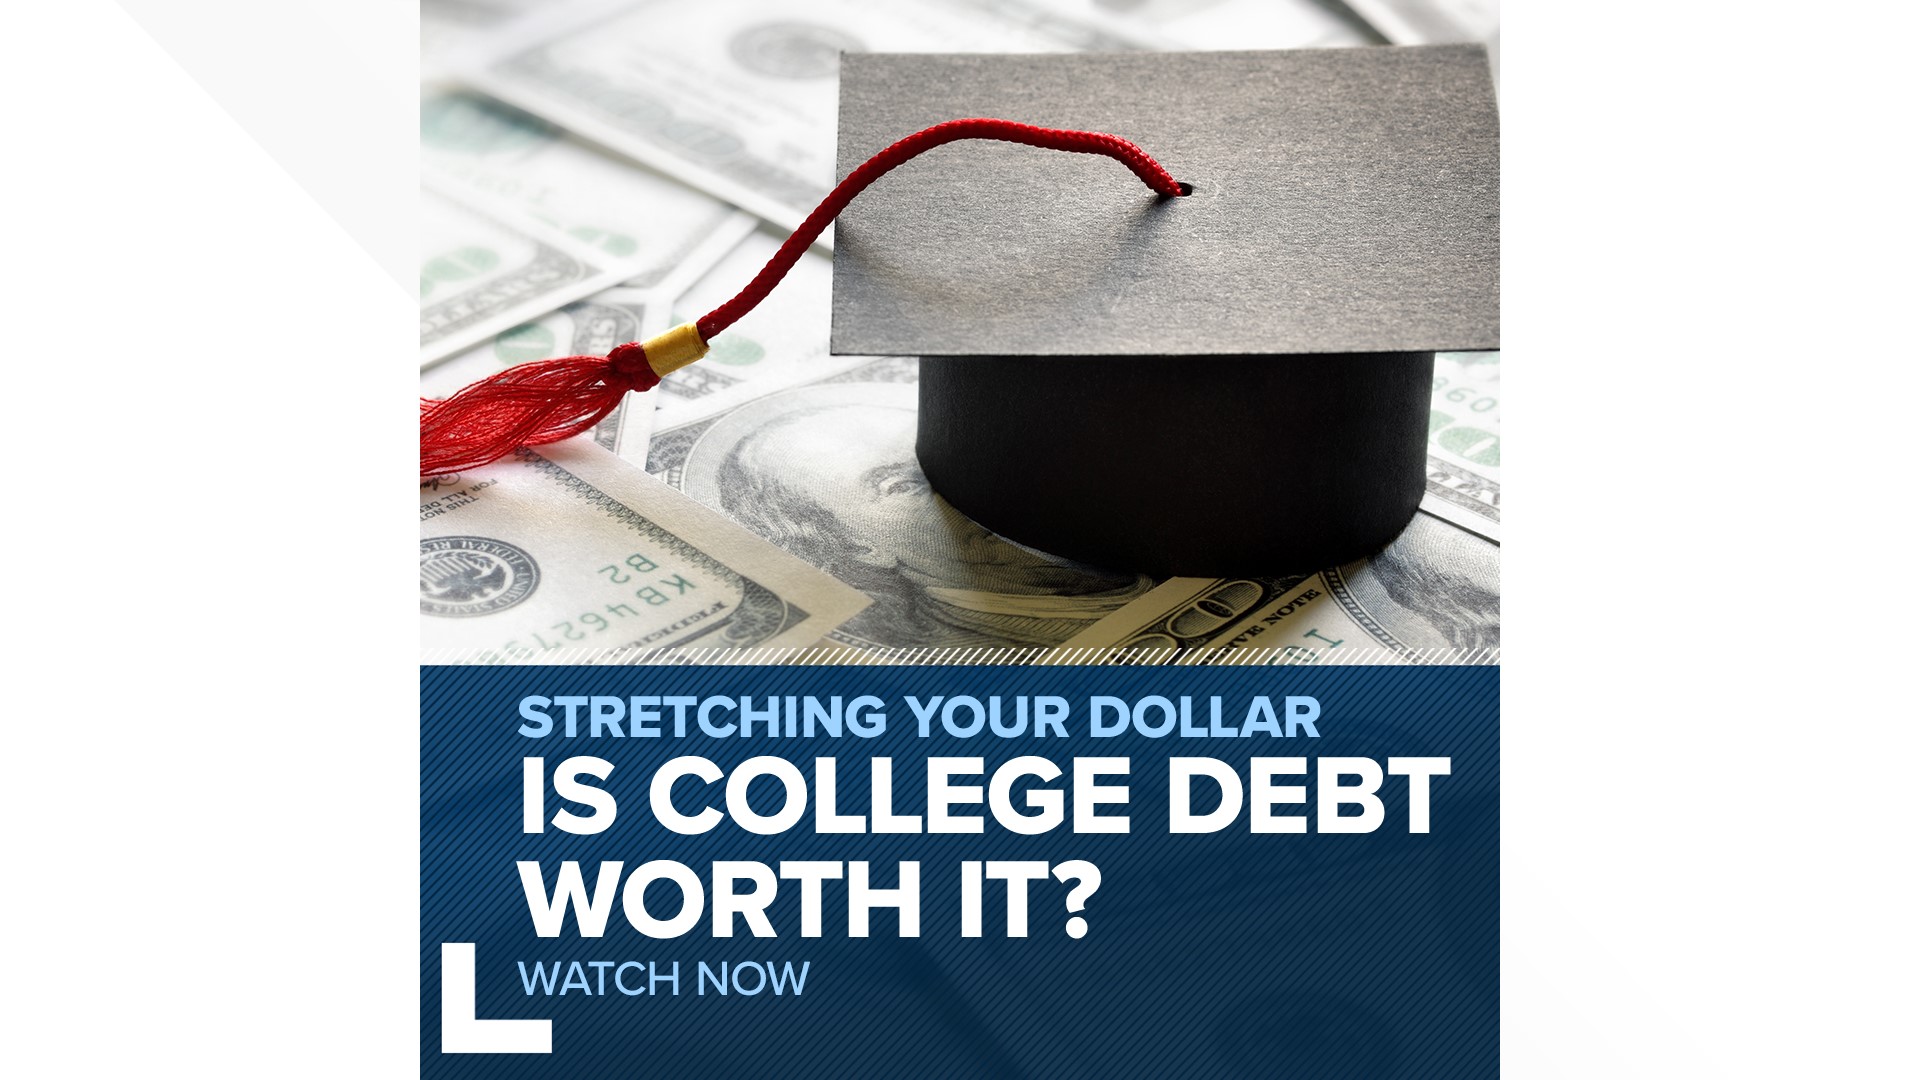 The Federal Reserve reports the current student loan debt in America is more than $1.6 trillion and tens of millions of Americans are carrying the load.